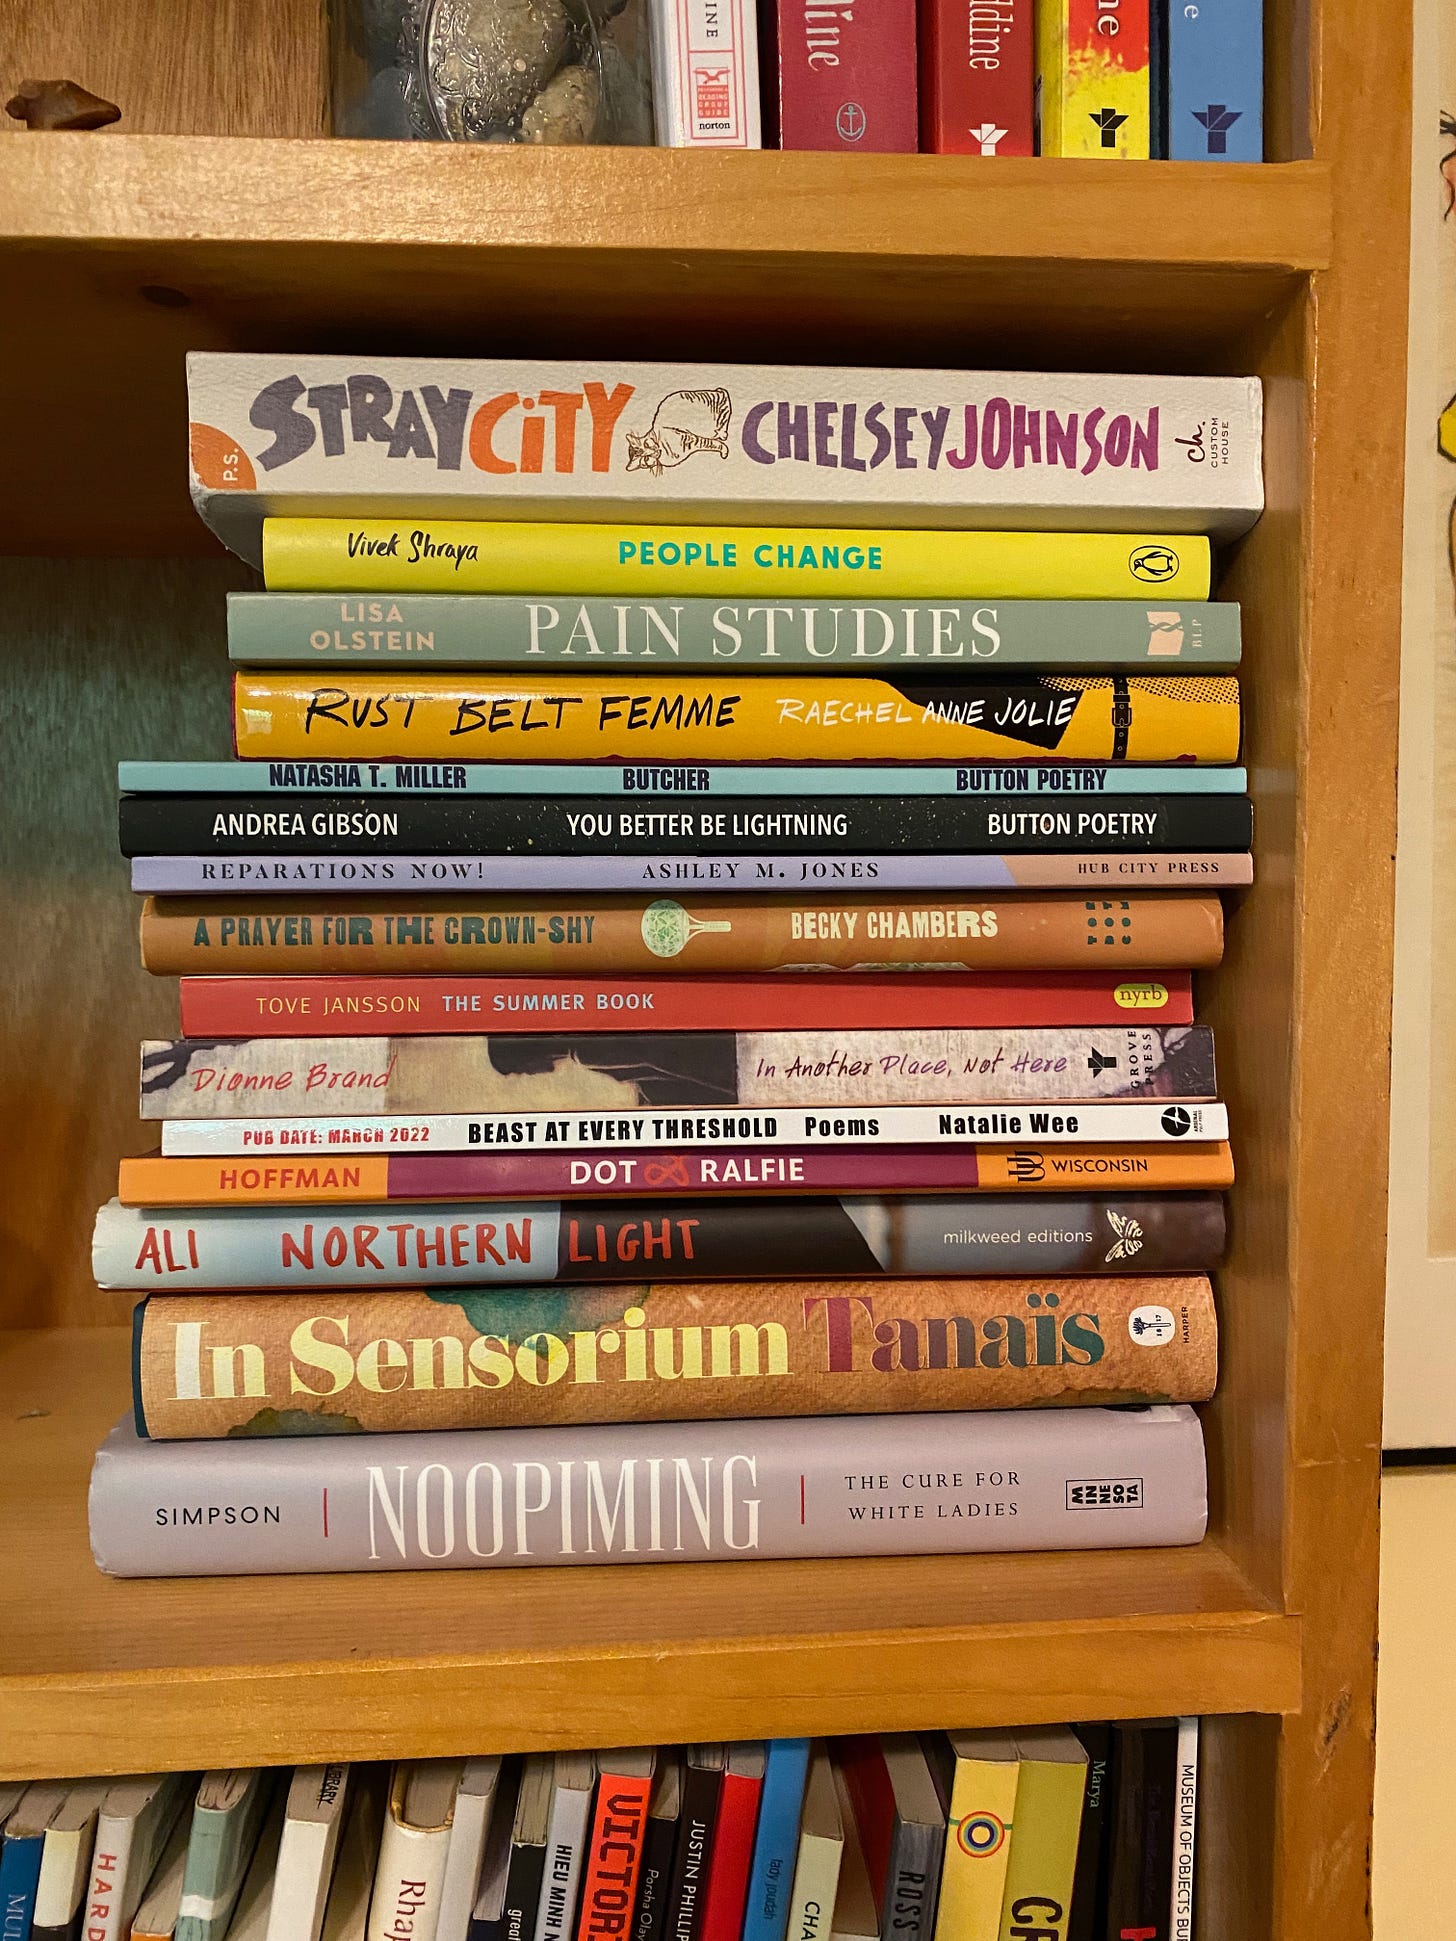 A large stack of books on a bookshelf. They include: Stray City, People Change, Pain Studies, Rust Belt Femme, Butcher, You Better Be Lightning, Reparations Now!, A Prayer for the Crown-Shy, The Summer Book, In Another Place, Not Here, Beast at Every Threshold, Dot & Ralfie, Northern Light, and In Sensorium.